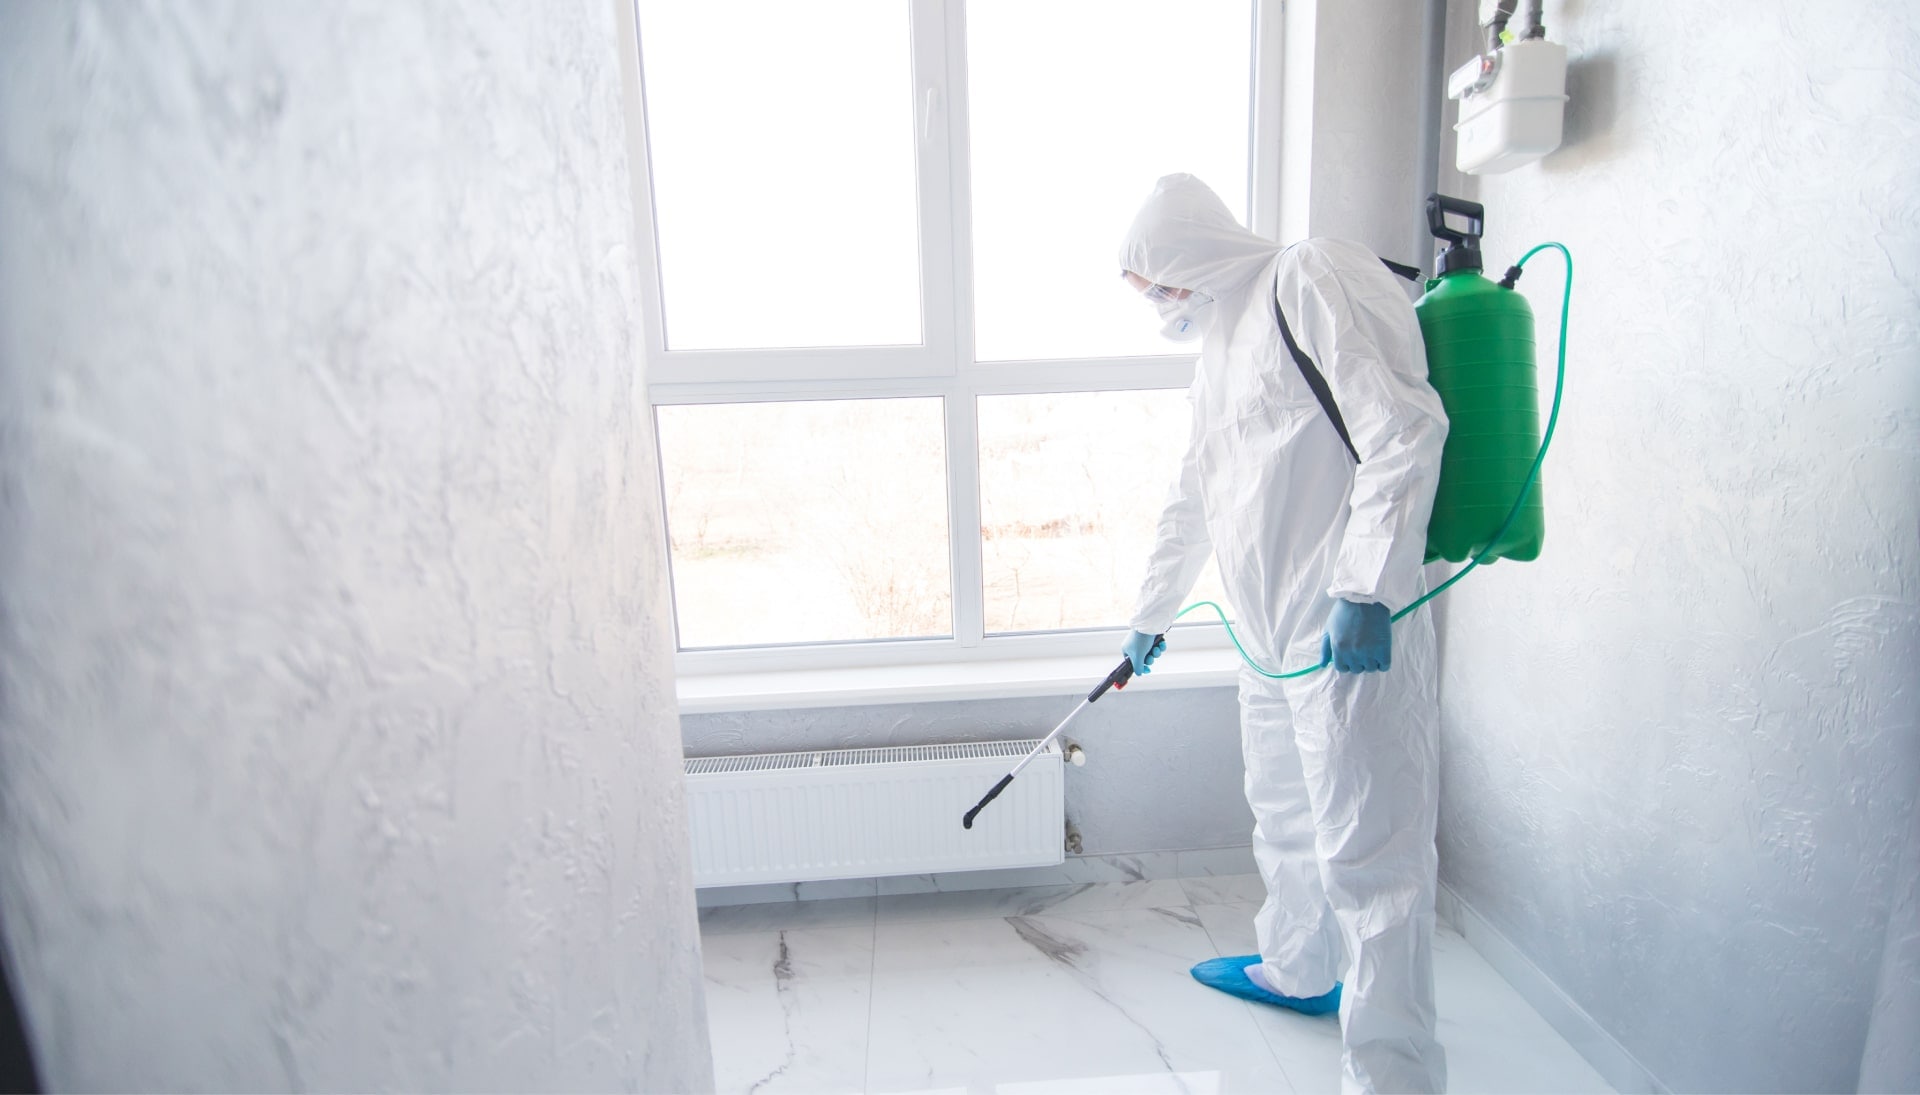 We provide the highest-quality mold inspection, testing, and removal services in the Gulfport, Mississippi area.